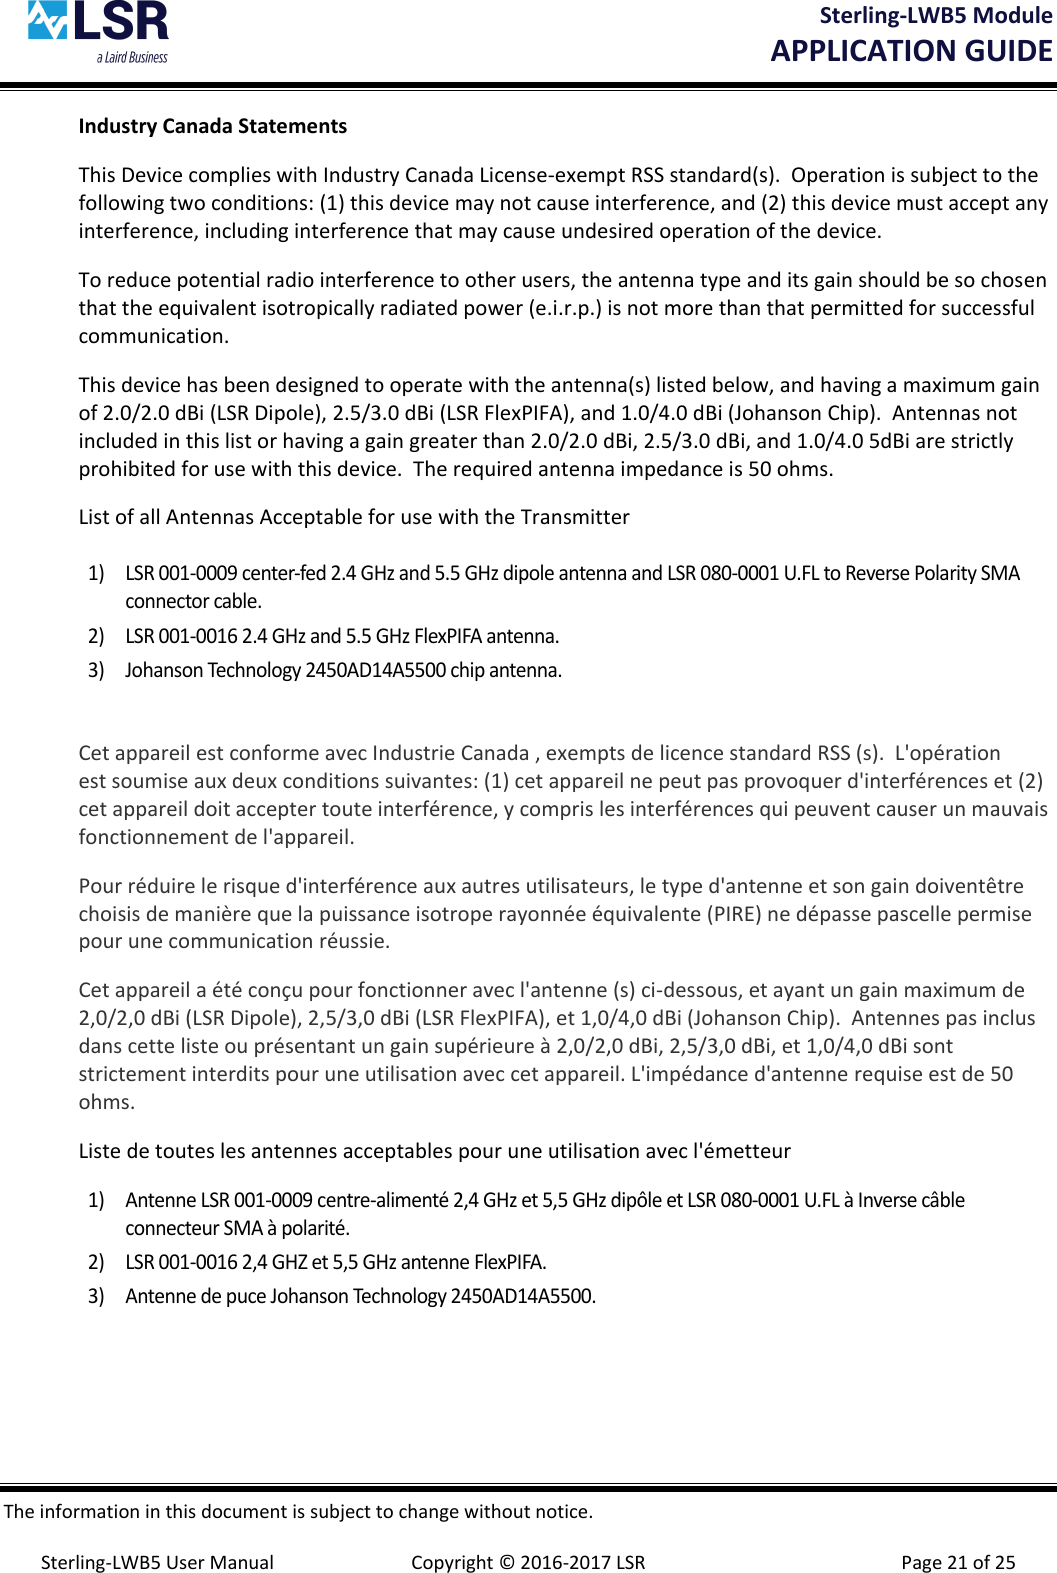 Sterling-LWB5 Module       APPLICATION GUIDE  The information in this document is subject to change without notice.  Sterling-LWB5 User Manual  Copyright © 2016-2017 LSR  Page 21 of 25 Industry Canada Statements This Device complies with Industry Canada License-exempt RSS standard(s).  Operation is subject to the following two conditions: (1) this device may not cause interference, and (2) this device must accept any interference, including interference that may cause undesired operation of the device. To reduce potential radio interference to other users, the antenna type and its gain should be so chosen that the equivalent isotropically radiated power (e.i.r.p.) is not more than that permitted for successful communication. This device has been designed to operate with the antenna(s) listed below, and having a maximum gain of 2.0/2.0 dBi (LSR Dipole), 2.5/3.0 dBi (LSR FlexPIFA), and 1.0/4.0 dBi (Johanson Chip).  Antennas not included in this list or having a gain greater than 2.0/2.0 dBi, 2.5/3.0 dBi, and 1.0/4.0 5dBi are strictly prohibited for use with this device.  The required antenna impedance is 50 ohms. List of all Antennas Acceptable for use with the Transmitter  1) LSR 001-0009 center-fed 2.4 GHz and 5.5 GHz dipole antenna and LSR 080-0001 U.FL to Reverse Polarity SMA connector cable. 2) LSR 001-0016 2.4 GHz and 5.5 GHz FlexPIFA antenna. 3) Johanson Technology 2450AD14A5500 chip antenna.  Cet appareil est conforme avec Industrie Canada , exempts de licence standard RSS (s).  L&apos;opération est soumise aux deux conditions suivantes: (1) cet appareil ne peut pas provoquer d&apos;interférences et (2) cet appareil doit accepter toute interférence, y compris les interférences qui peuvent causer un mauvais fonctionnement de l&apos;appareil. Pour réduire le risque d&apos;interférence aux autres utilisateurs, le type d&apos;antenne et son gain doiventêtre choisis de manière que la puissance isotrope rayonnée équivalente (PIRE) ne dépasse pascelle permise pour une communication réussie. Cet appareil a été conçu pour fonctionner avec l&apos;antenne (s) ci-dessous, et ayant un gain maximum de 2,0/2,0 dBi (LSR Dipole), 2,5/3,0 dBi (LSR FlexPIFA), et 1,0/4,0 dBi (Johanson Chip).  Antennes pas inclus dans cette liste ou présentant un gain supérieure à 2,0/2,0 dBi, 2,5/3,0 dBi, et 1,0/4,0 dBi sont strictement interdits pour une utilisation avec cet appareil. L&apos;impédance d&apos;antenne requise est de 50 ohms. Liste de toutes les antennes acceptables pour une utilisation avec l&apos;émetteur 1) Antenne LSR 001-0009 centre-alimenté 2,4 GHz et 5,5 GHz dipôle et LSR 080-0001 U.FL à Inverse câble connecteur SMA à polarité. 2) LSR 001-0016 2,4 GHZ et 5,5 GHz antenne FlexPIFA. 3) Antenne de puce Johanson Technology 2450AD14A5500.    